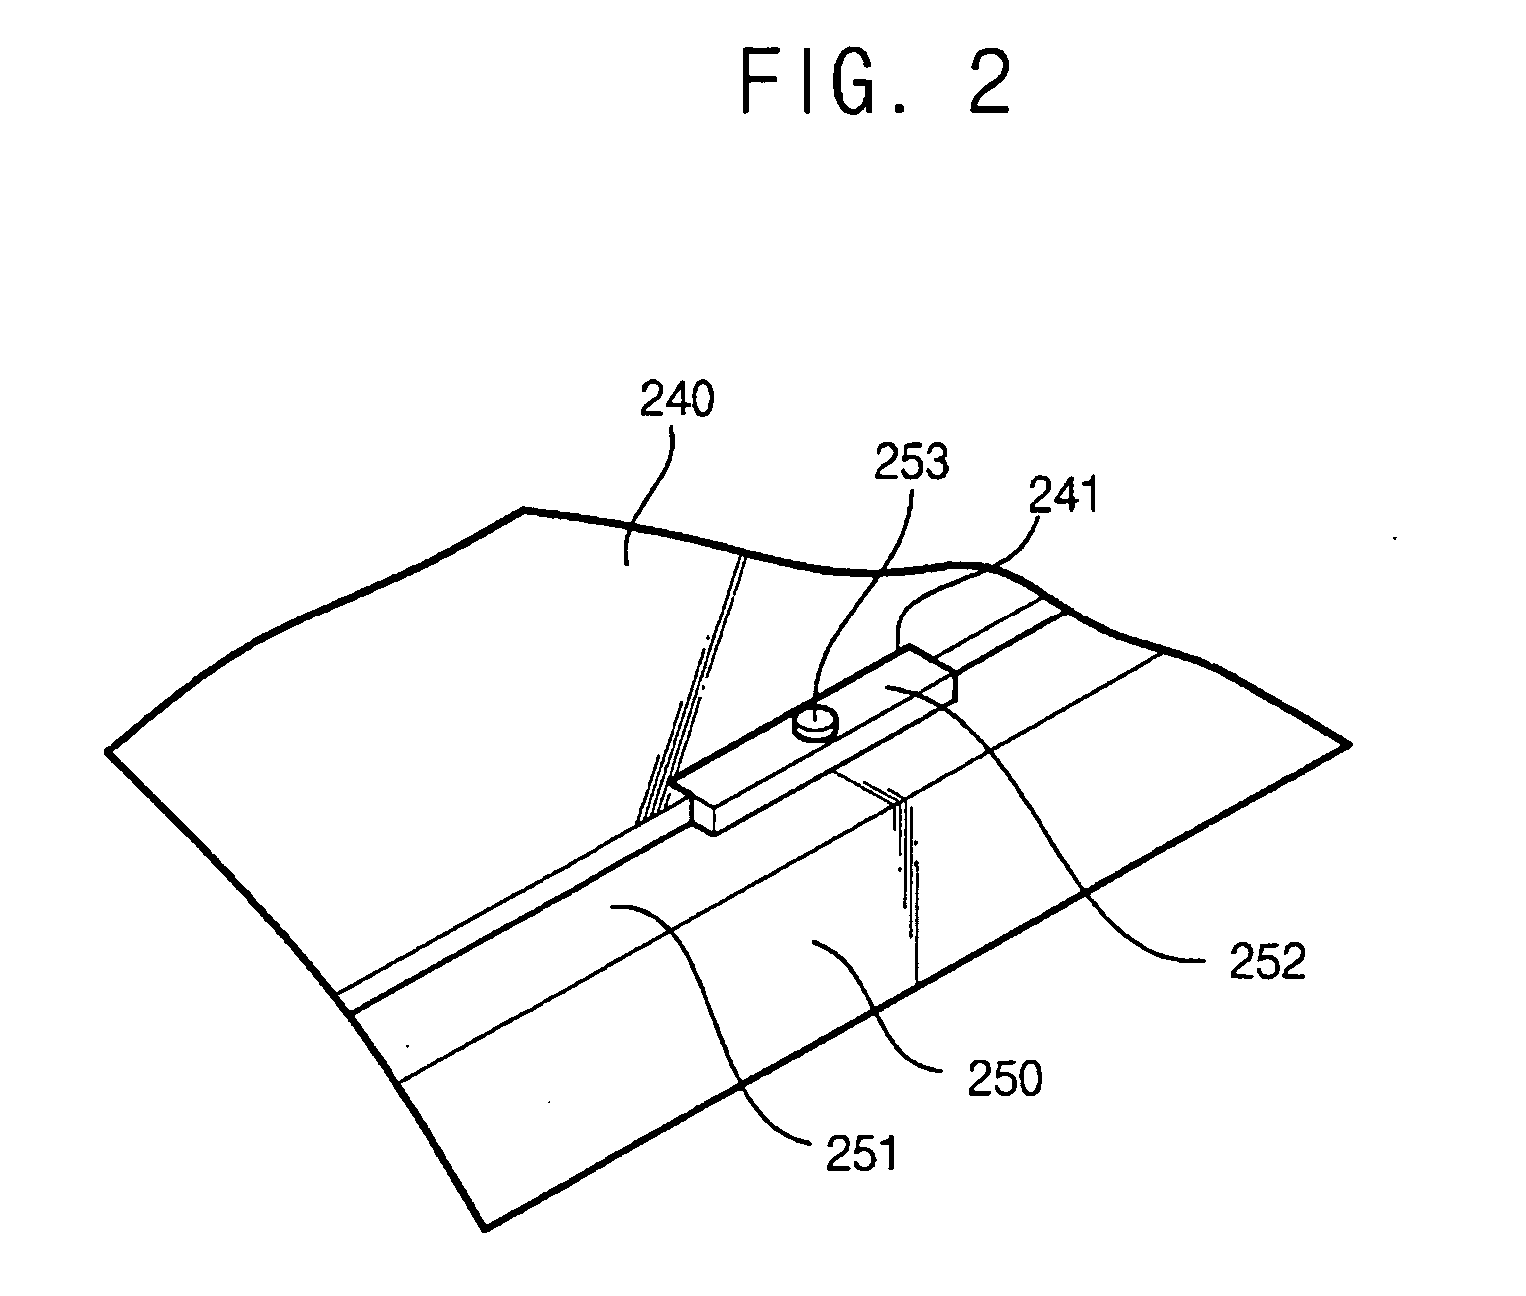 Display device and method of manufacturing thereof